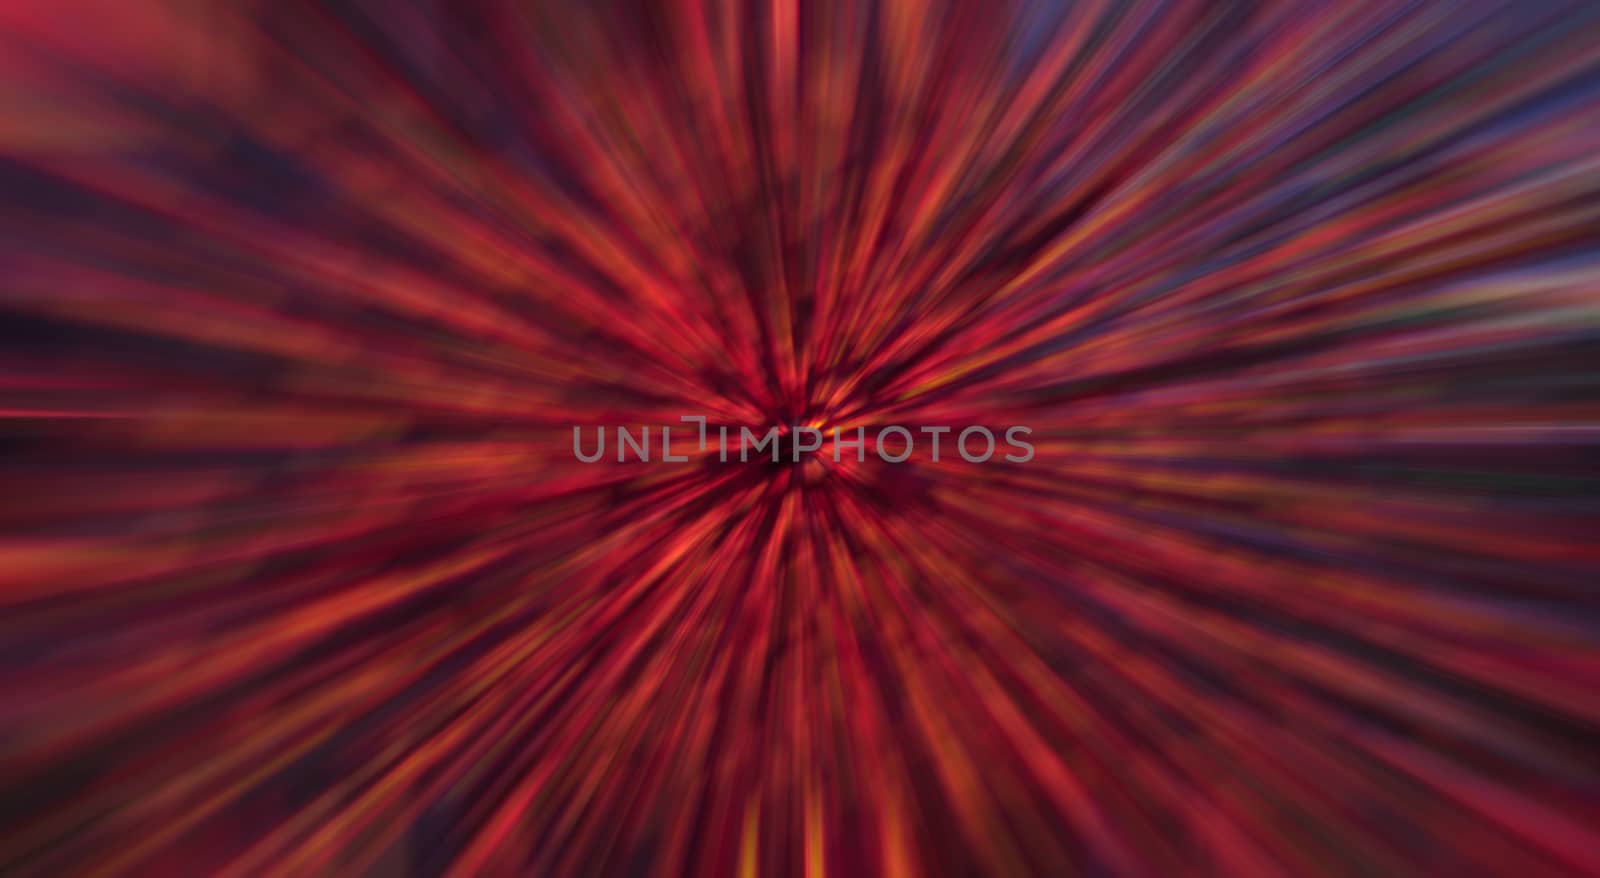 Abstract background made of blurred colorful, mostly red lights.